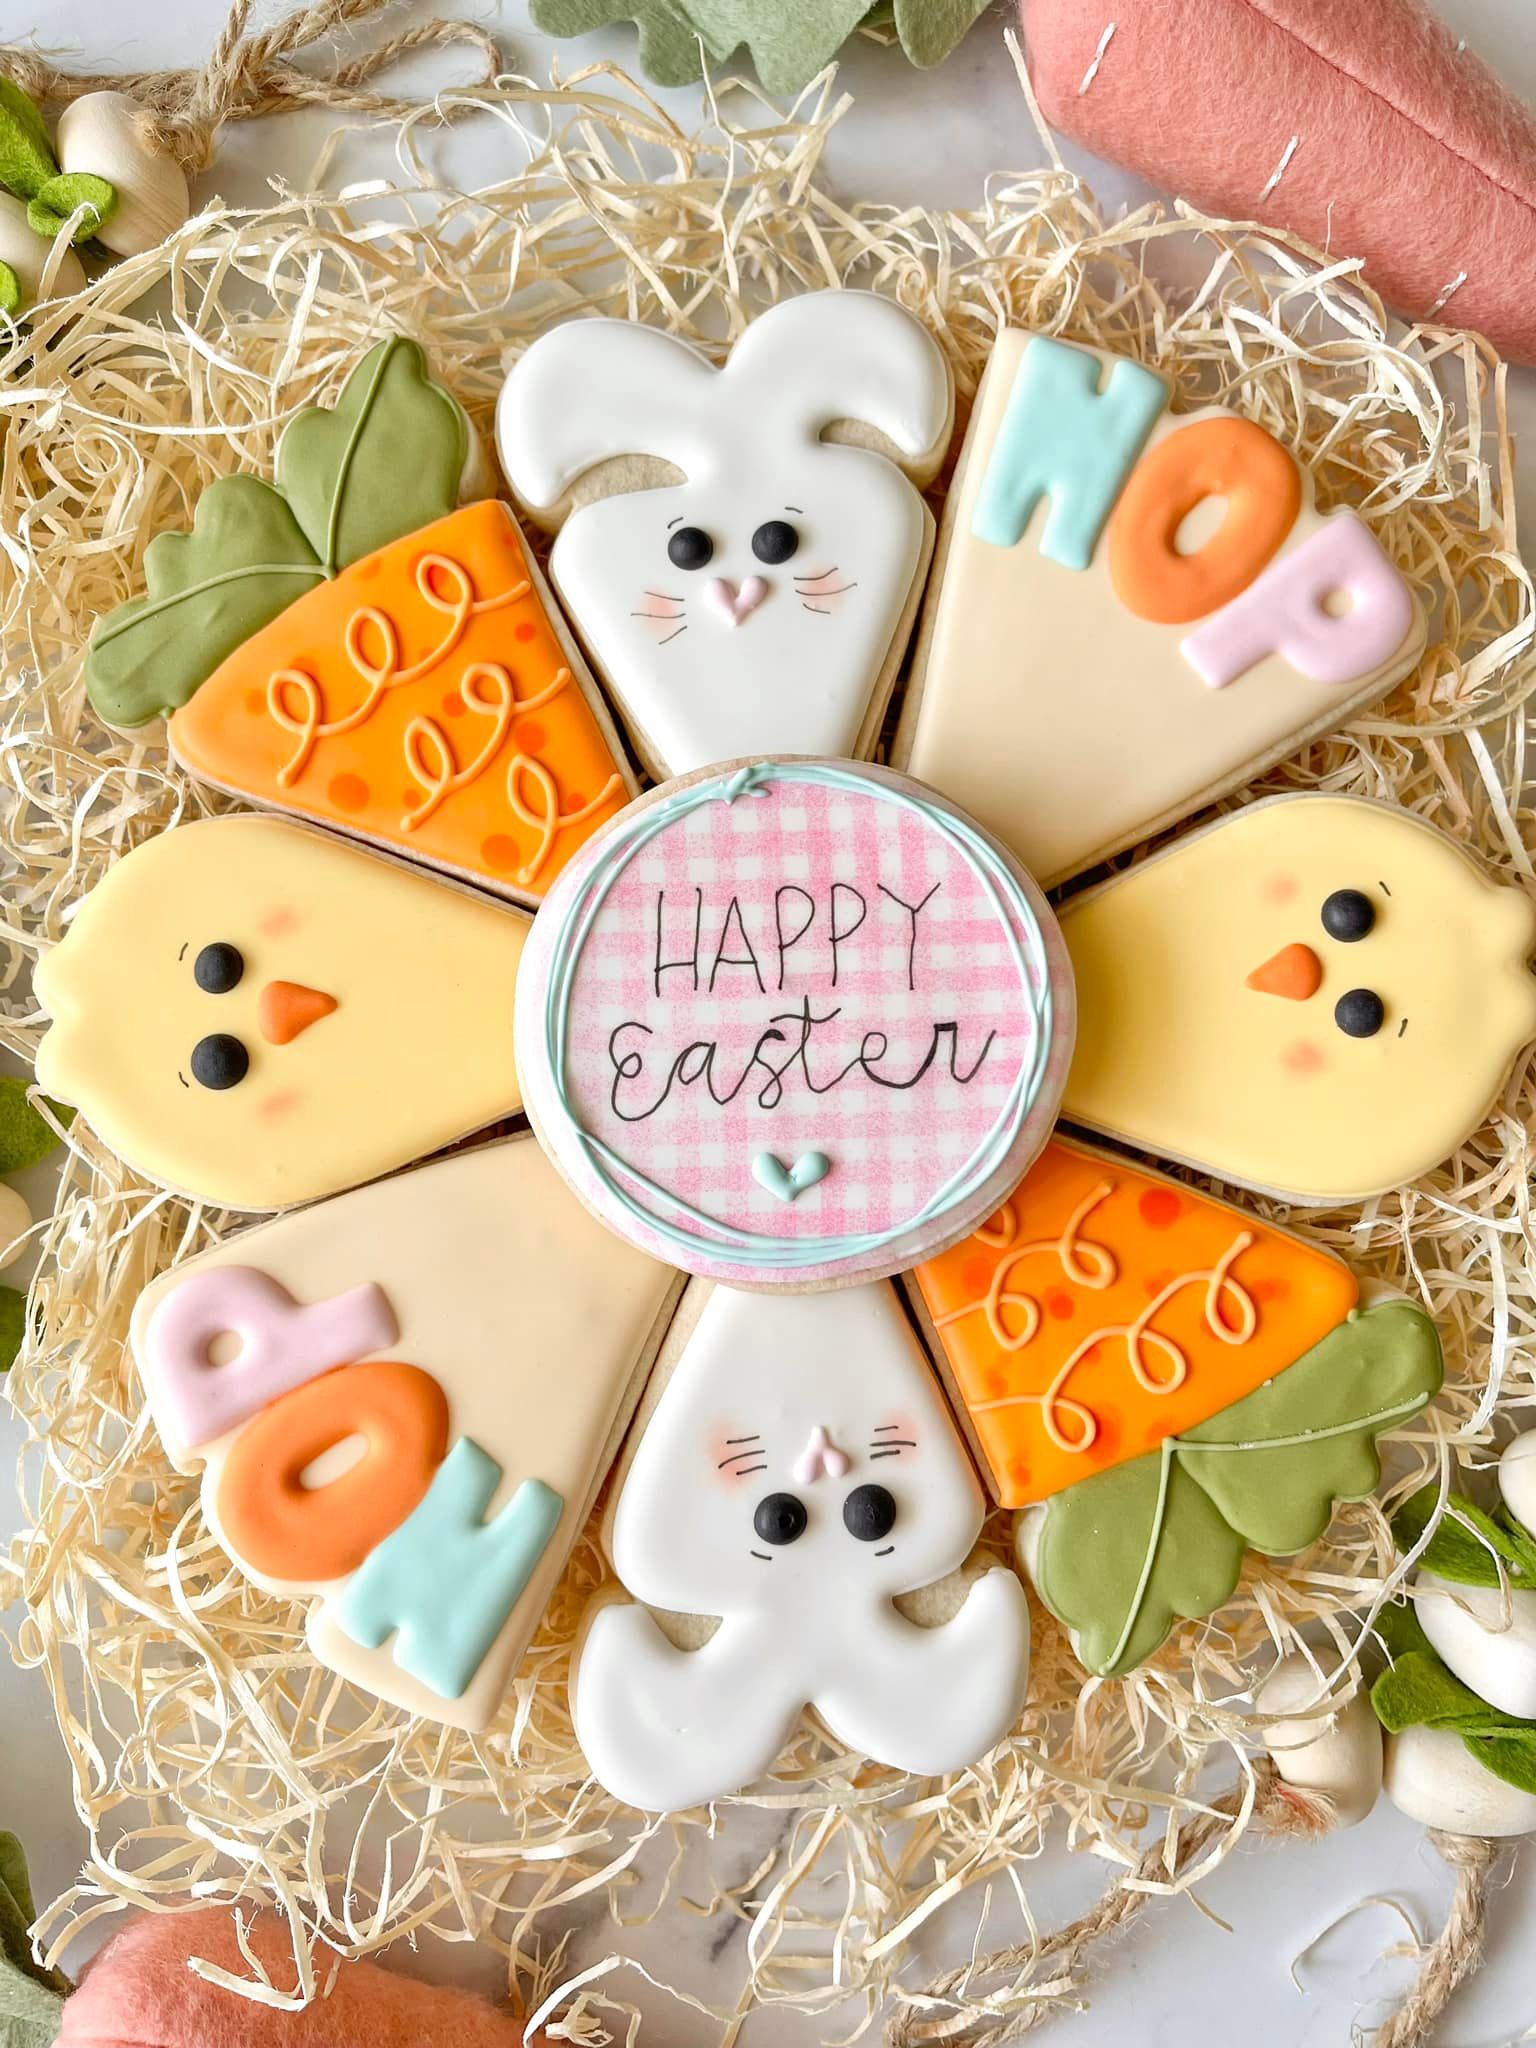 Easter cookies from Frosty’z Bakery by Jaeden. (Frosty’z Bakery by Jaeden)